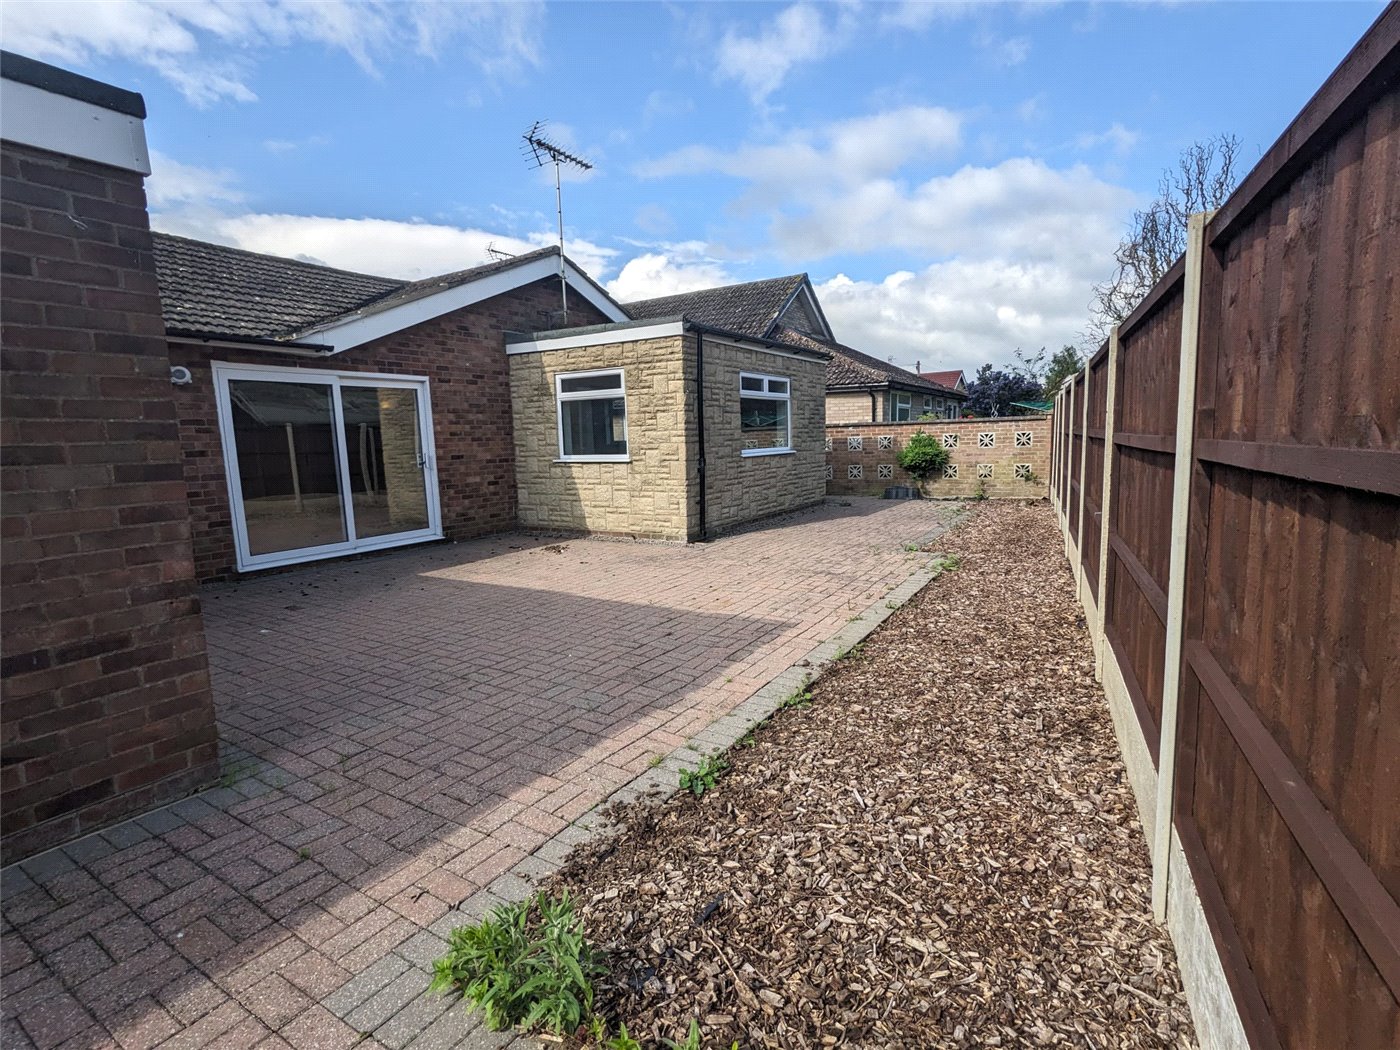 Fen Road, Pointon, Sleaford, Lincolnshire, NG34